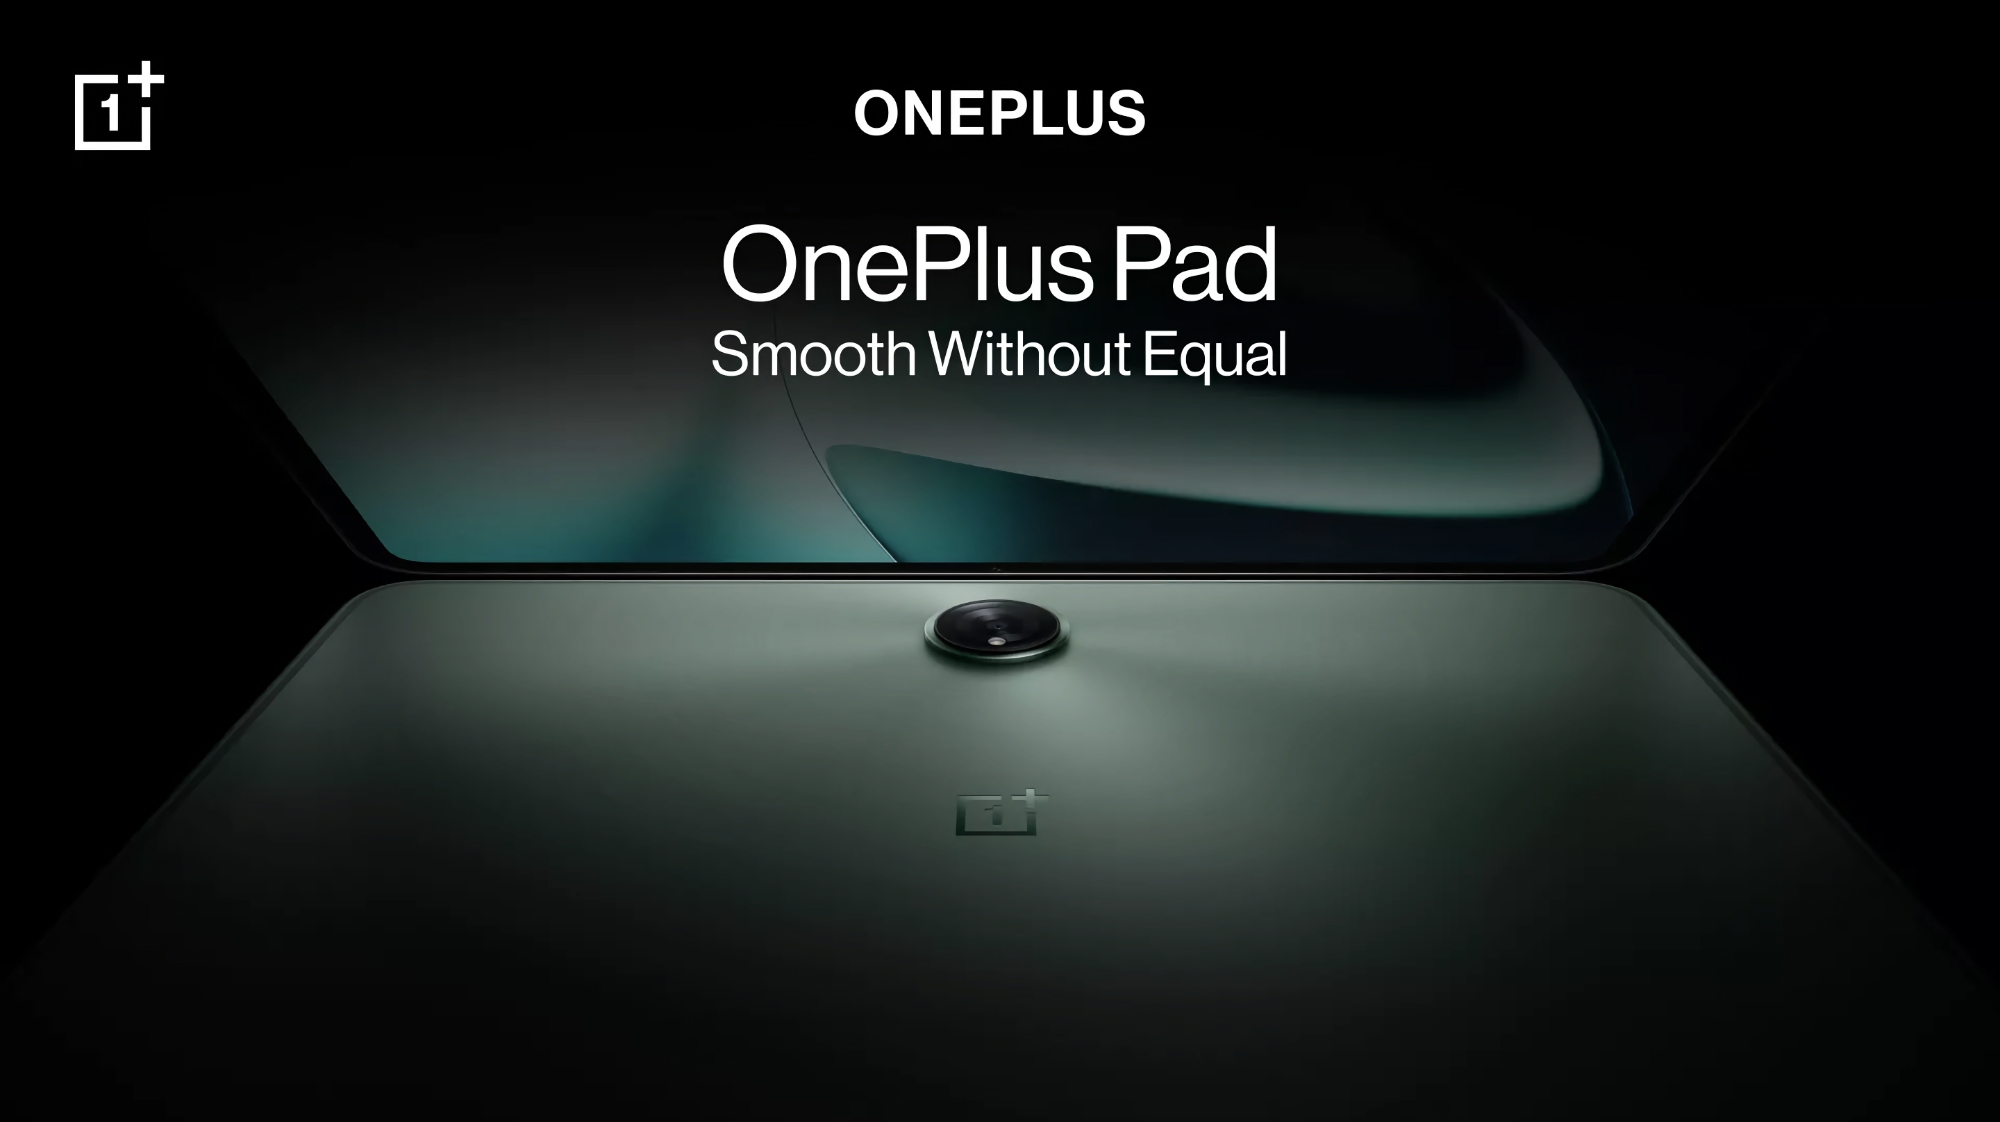 OnePlus Pad appears in official image: green body and camera with large circular protrusion